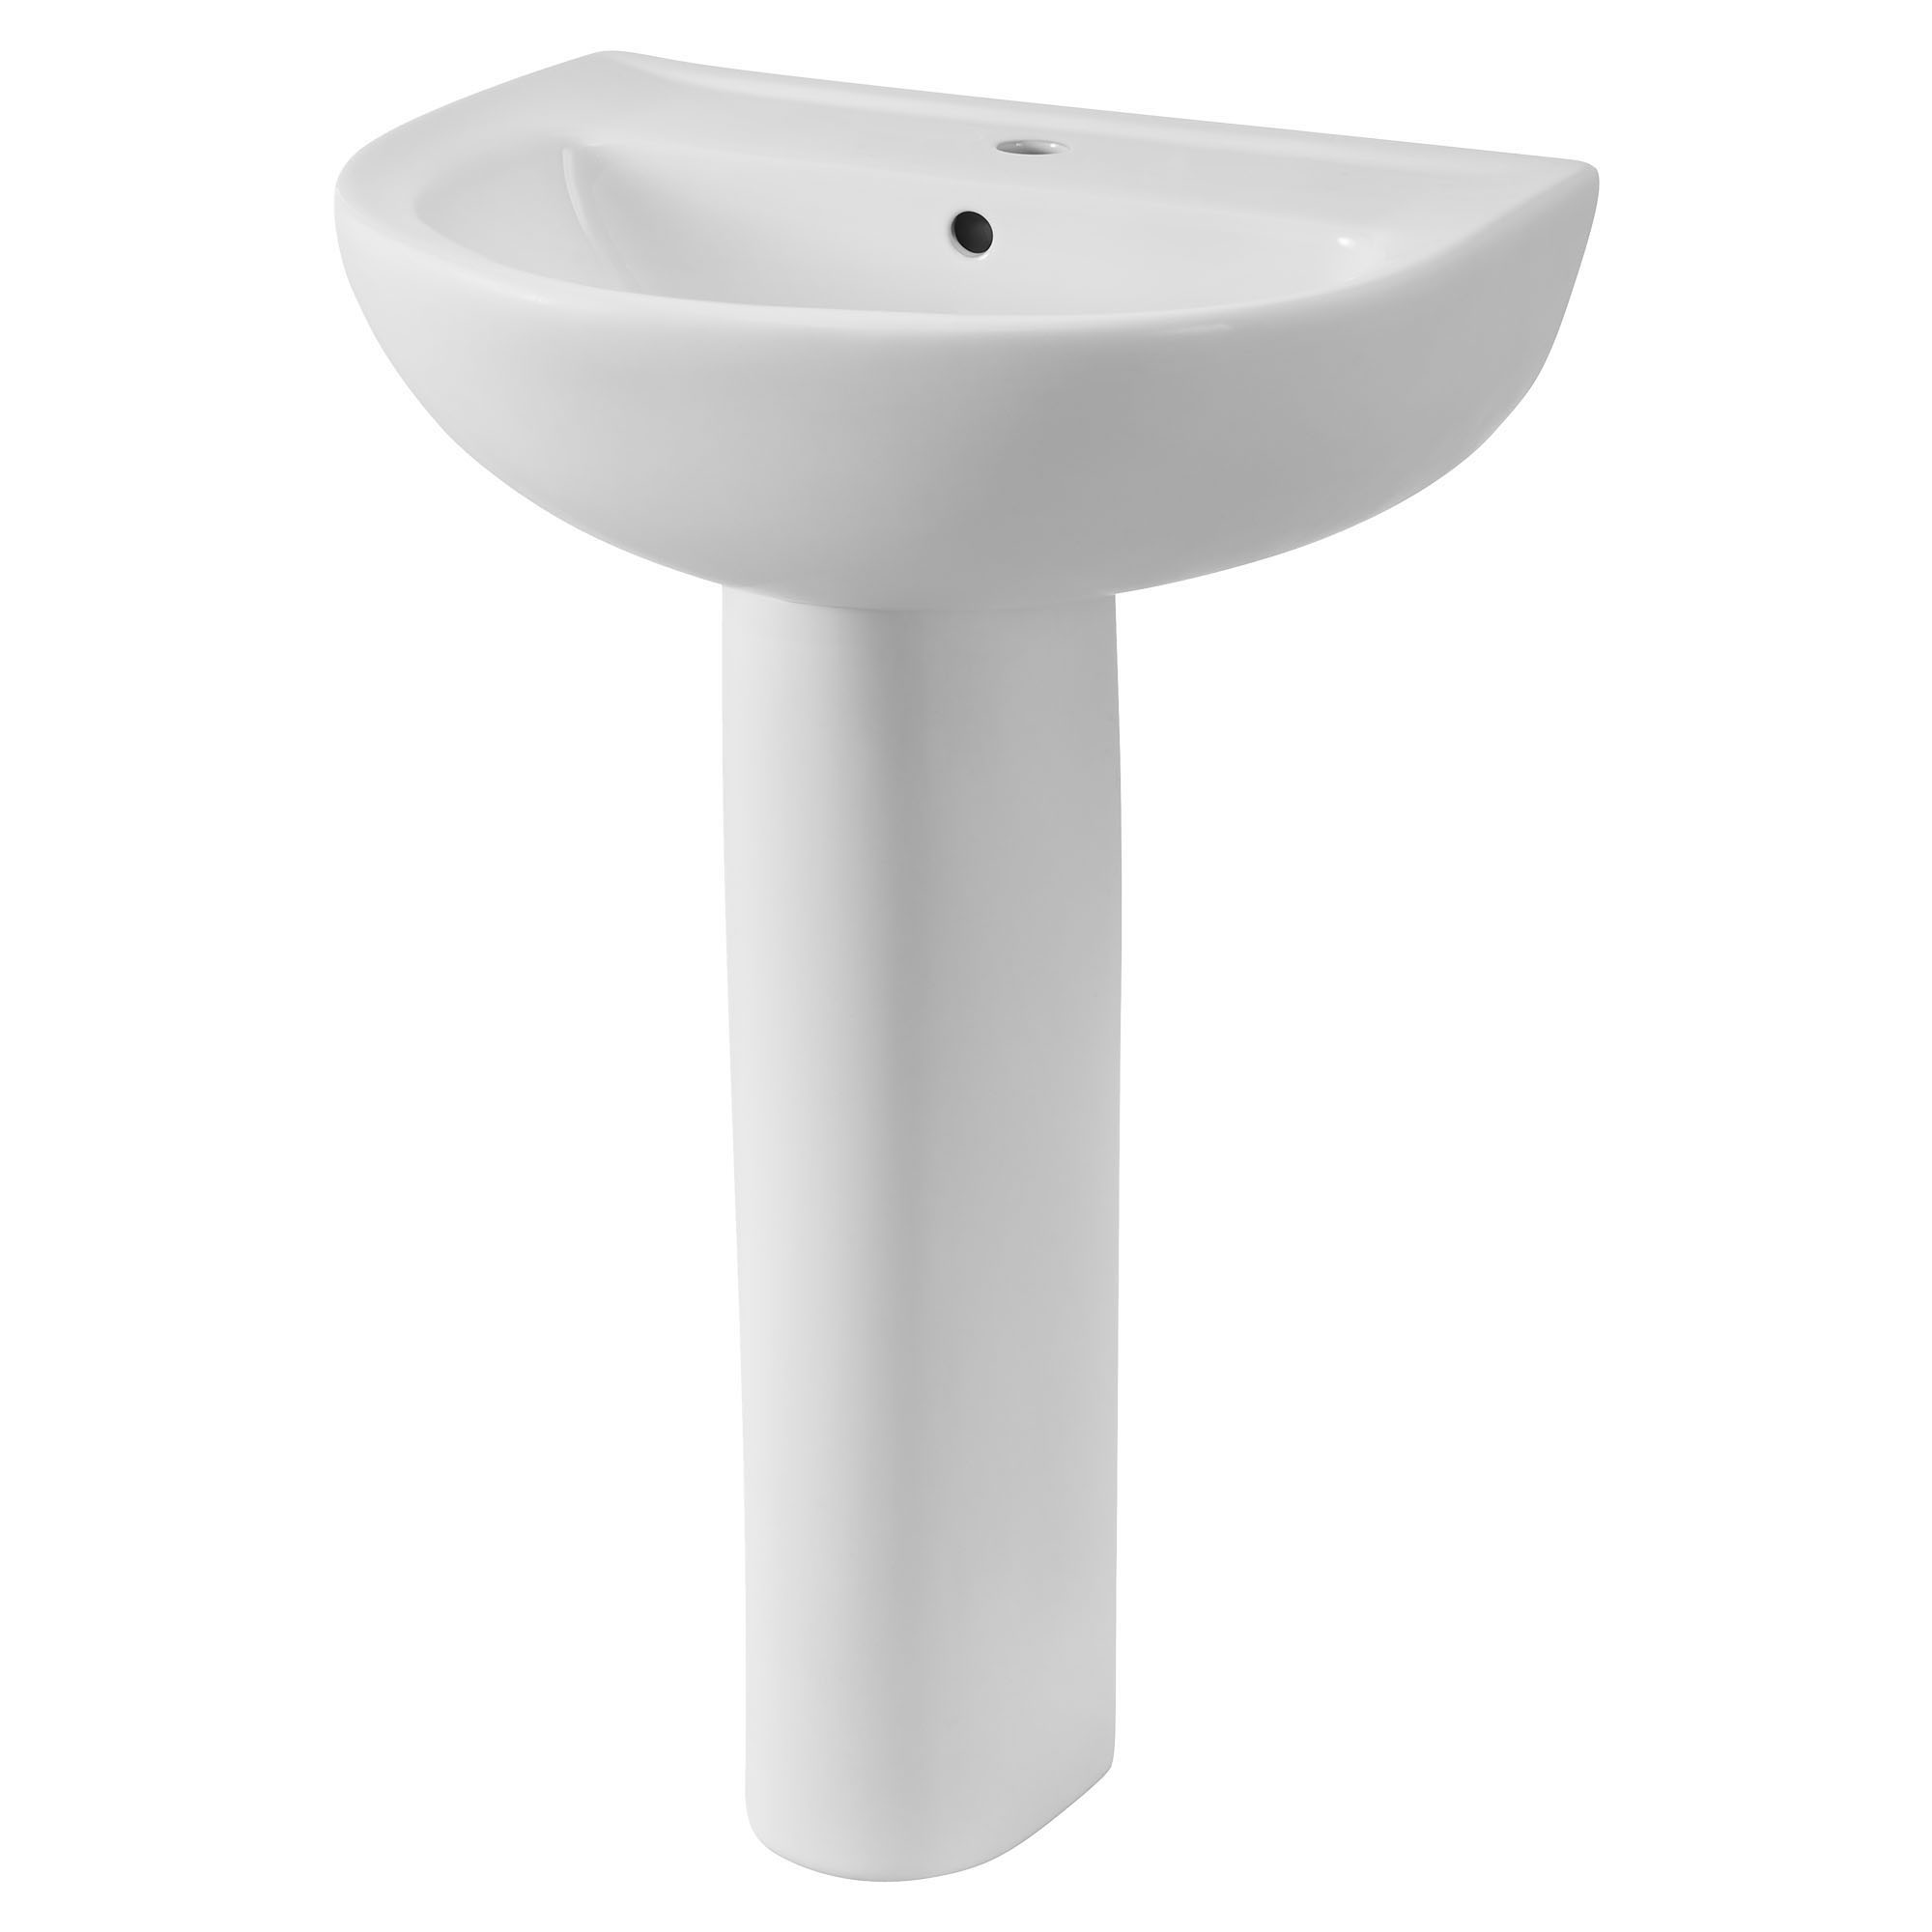 22-Inch Evolution® Center Hole Only Pedestal Sink Top and Leg Combination